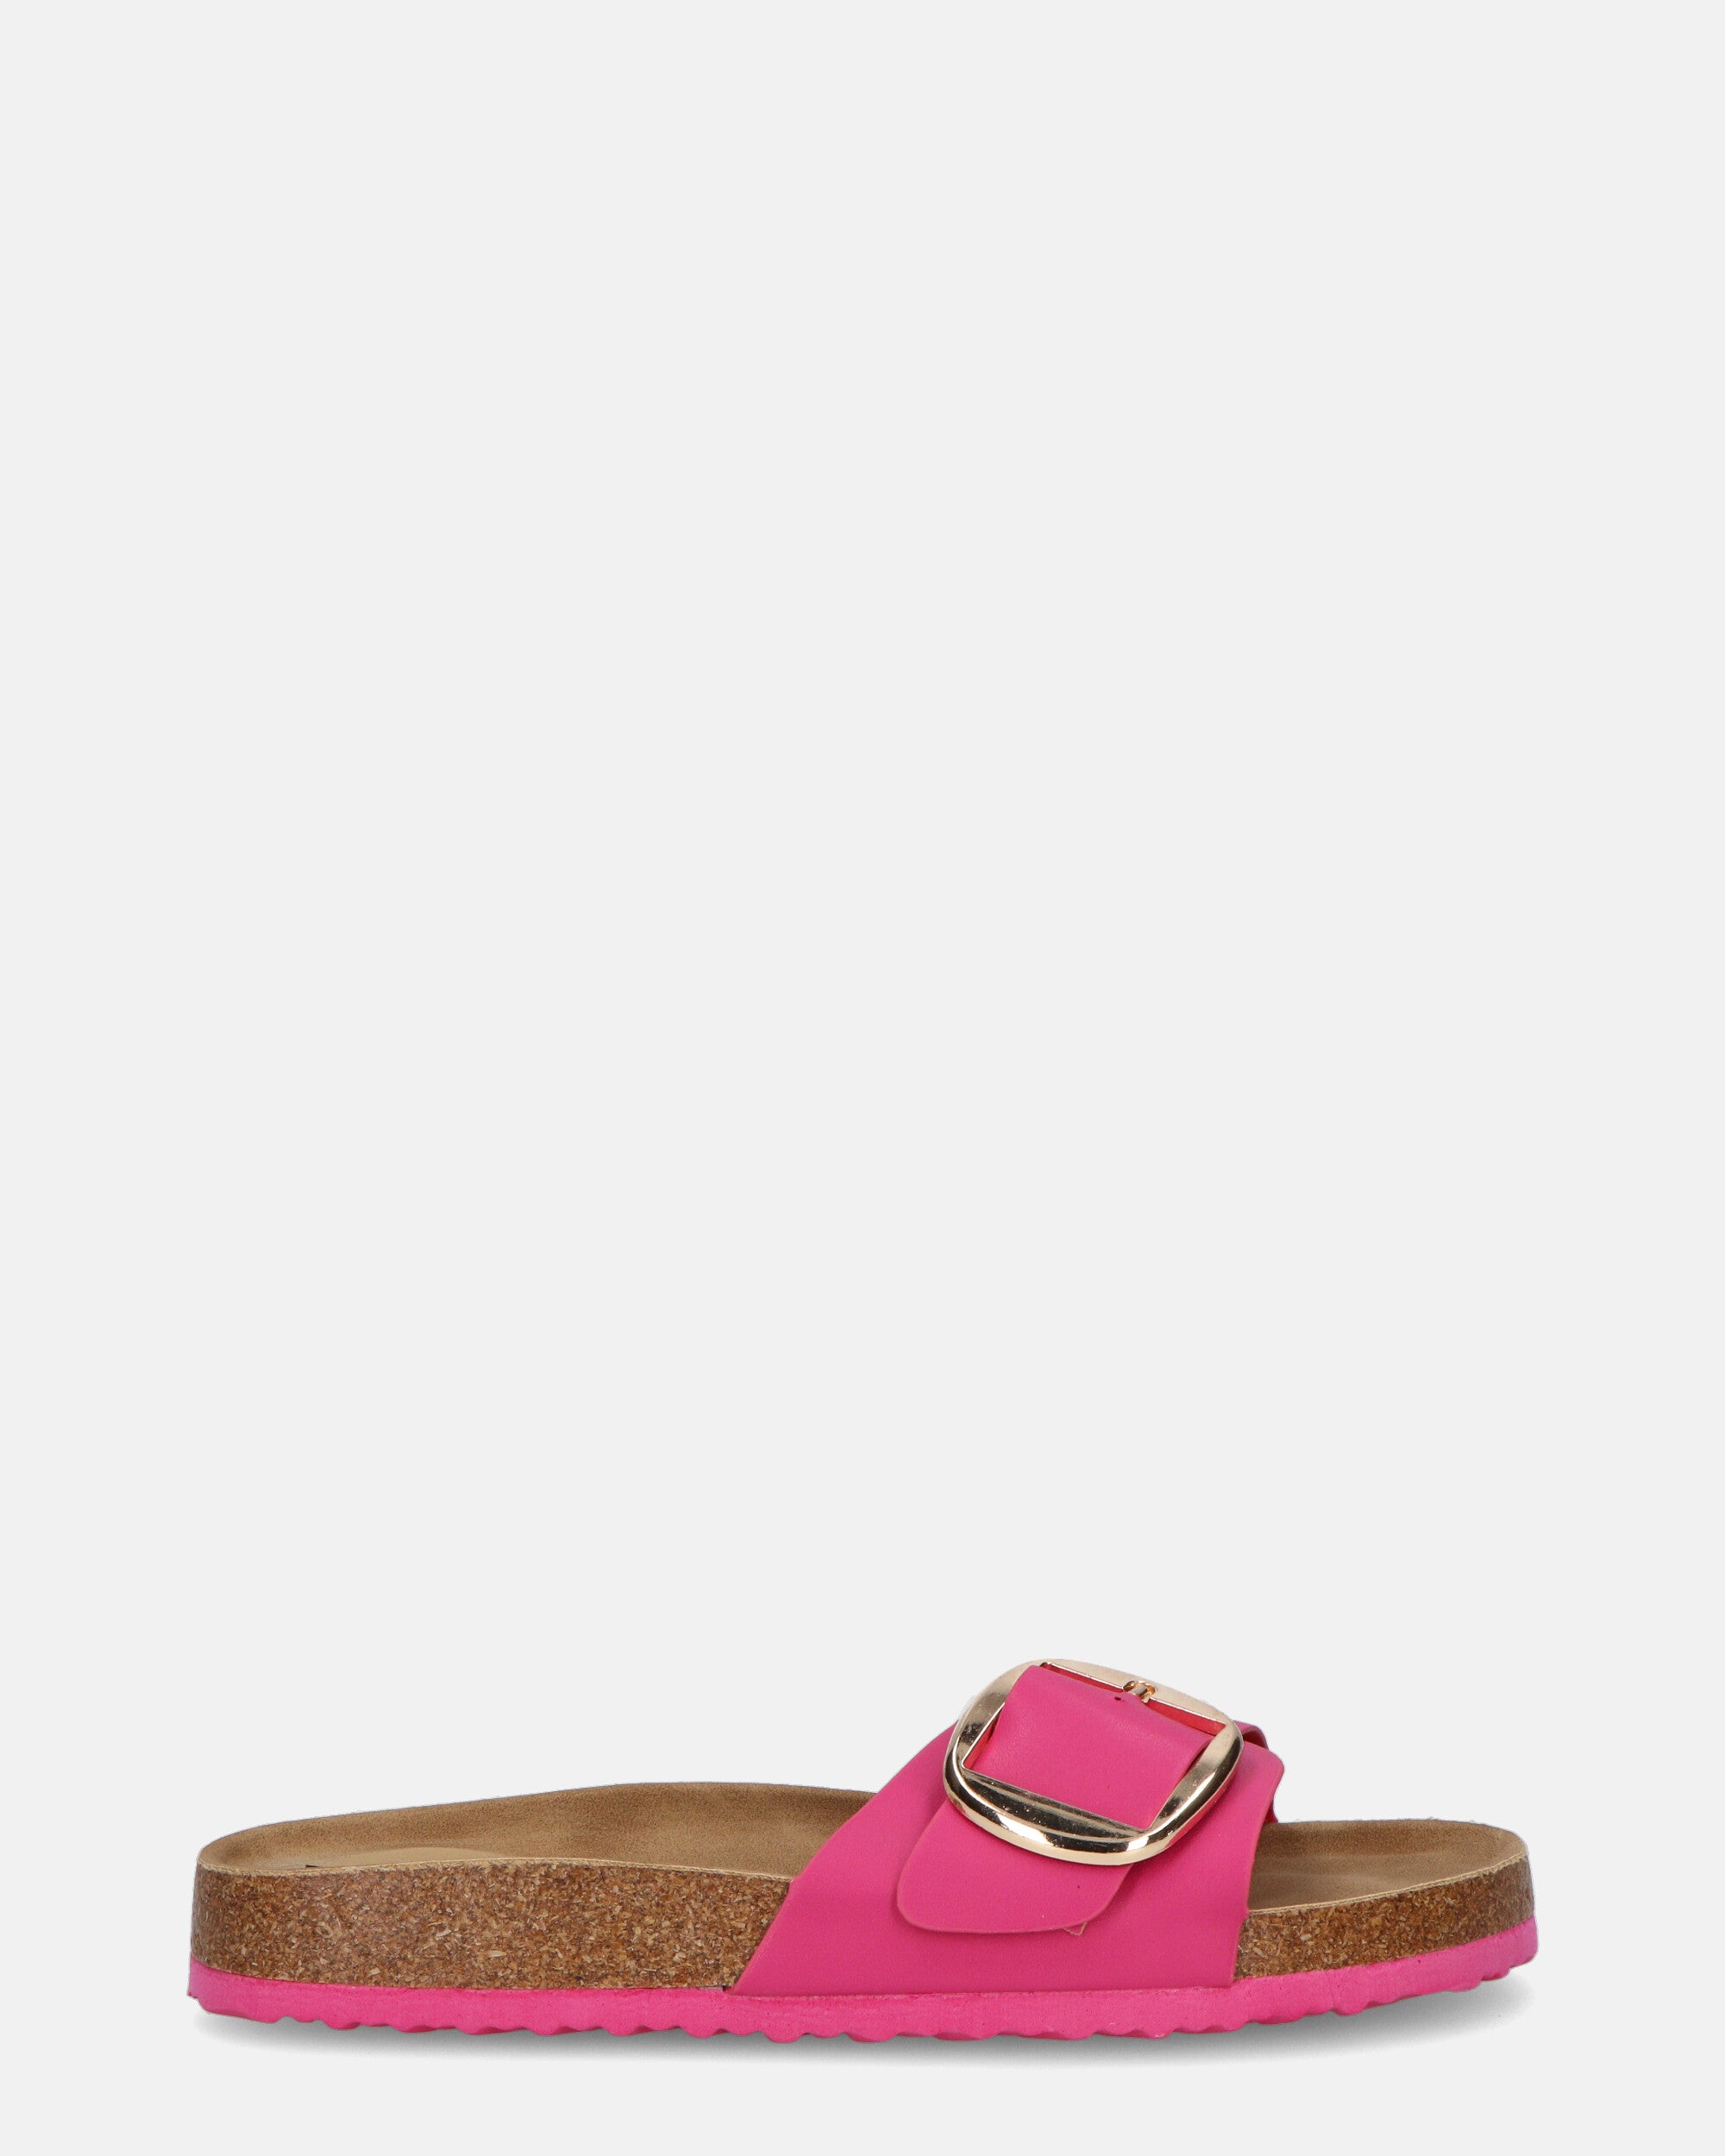 LENA - sandals with cork sole and fuchsia band